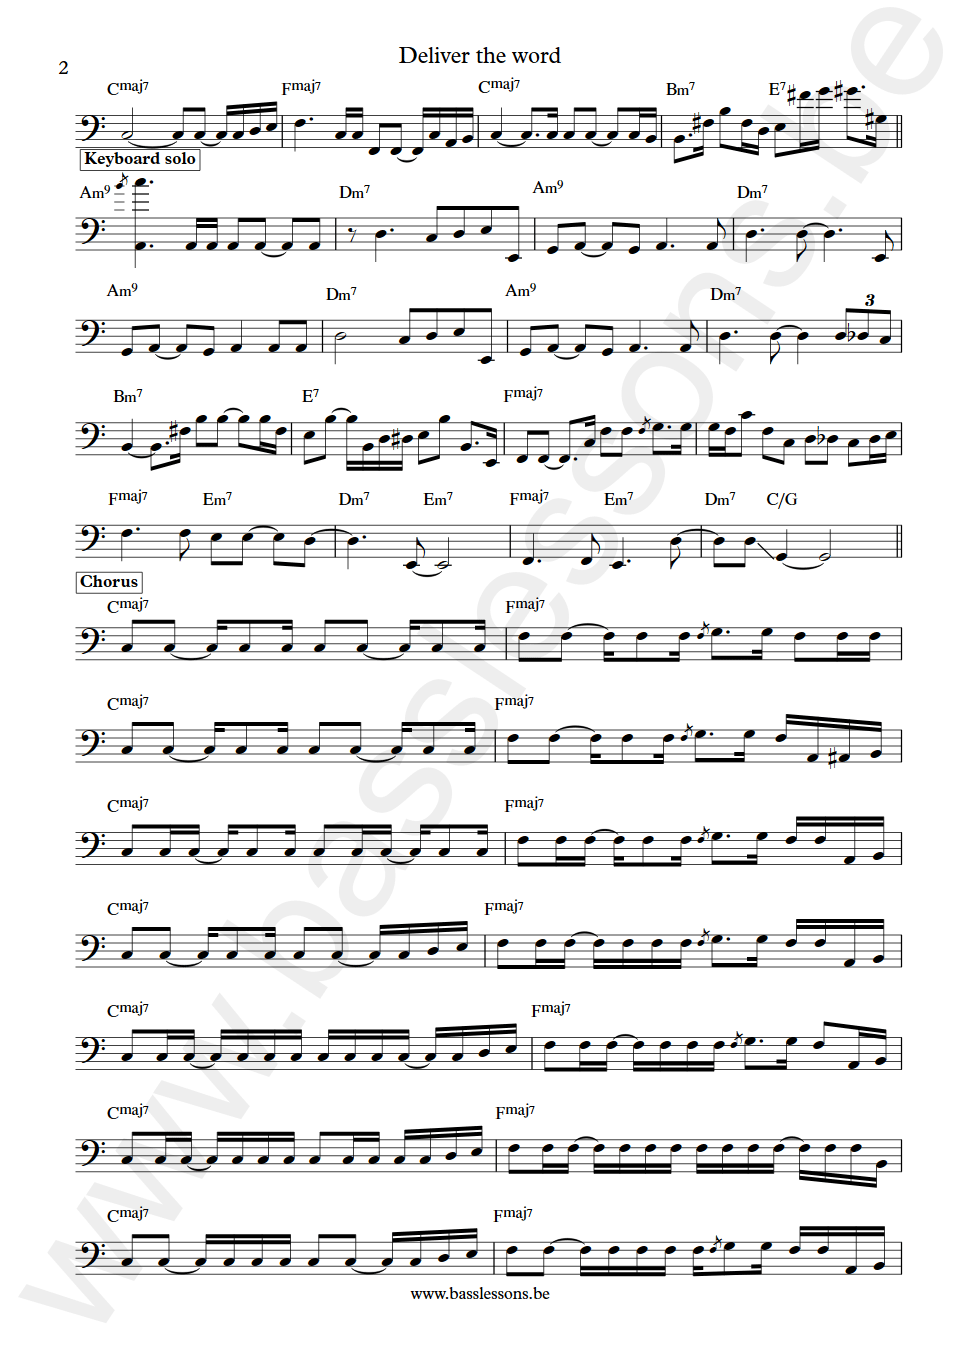 WAR Deliver the word B.B. Dickerson bass transcription part 2